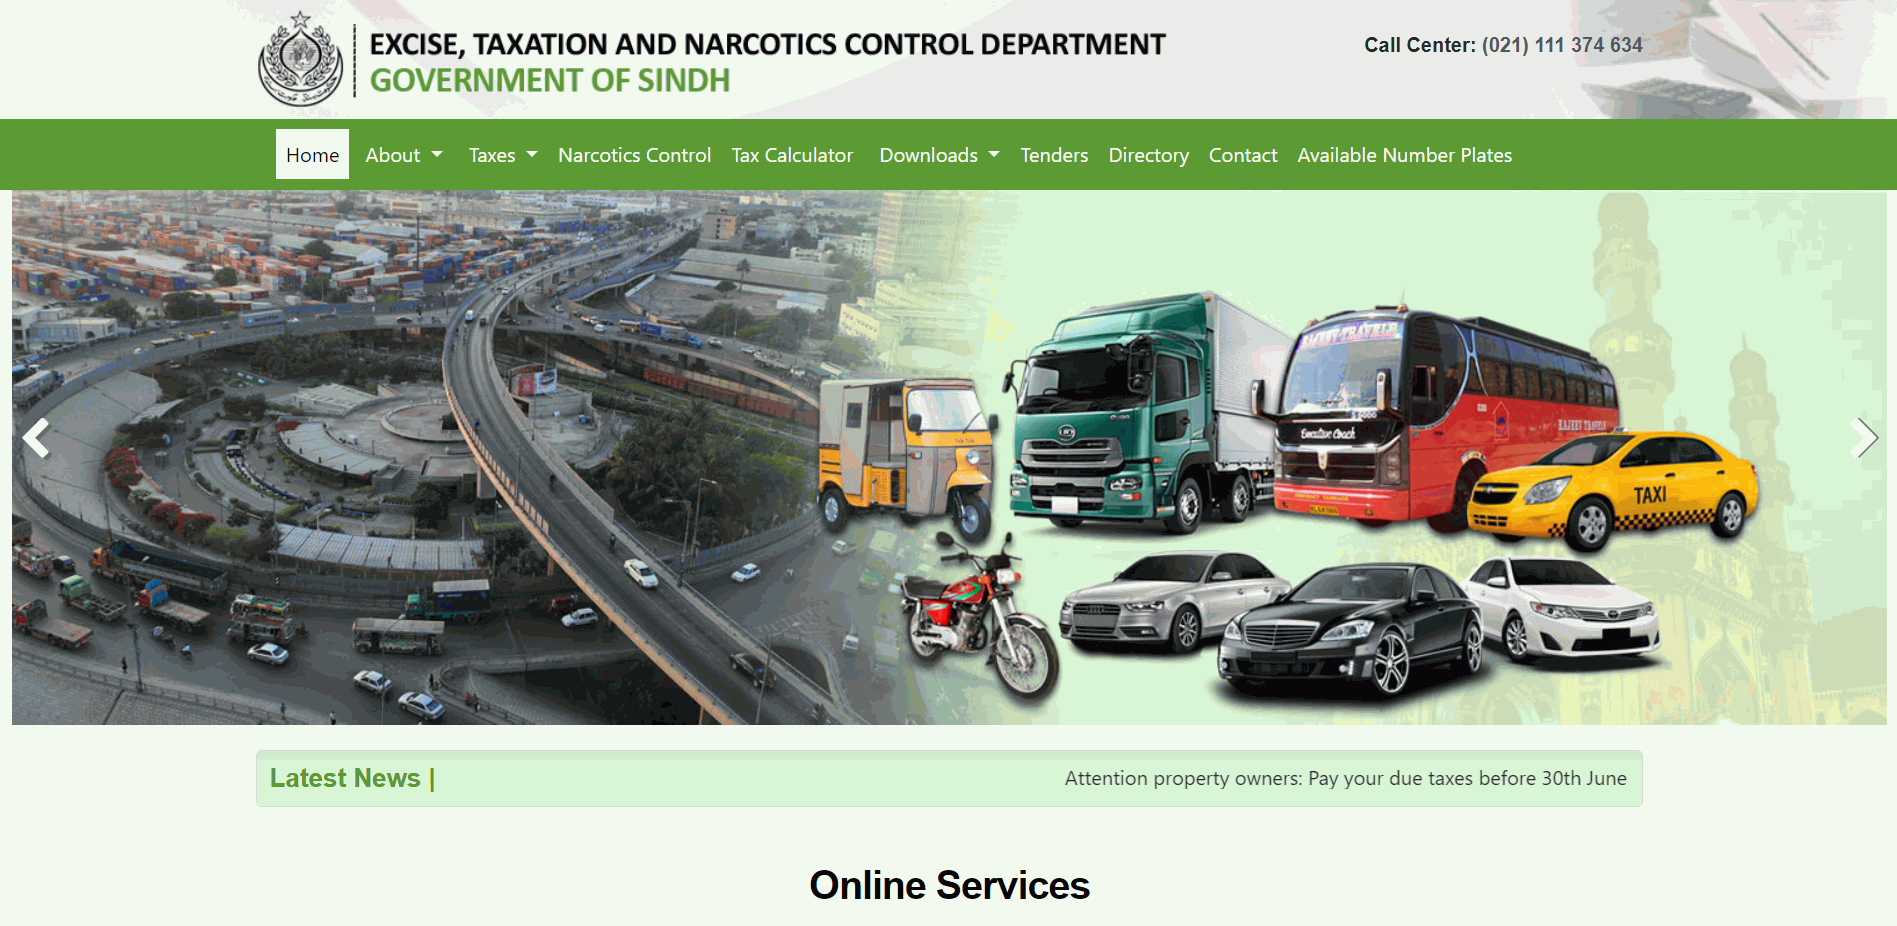 homepage of website of Sindh's taxation and excise department